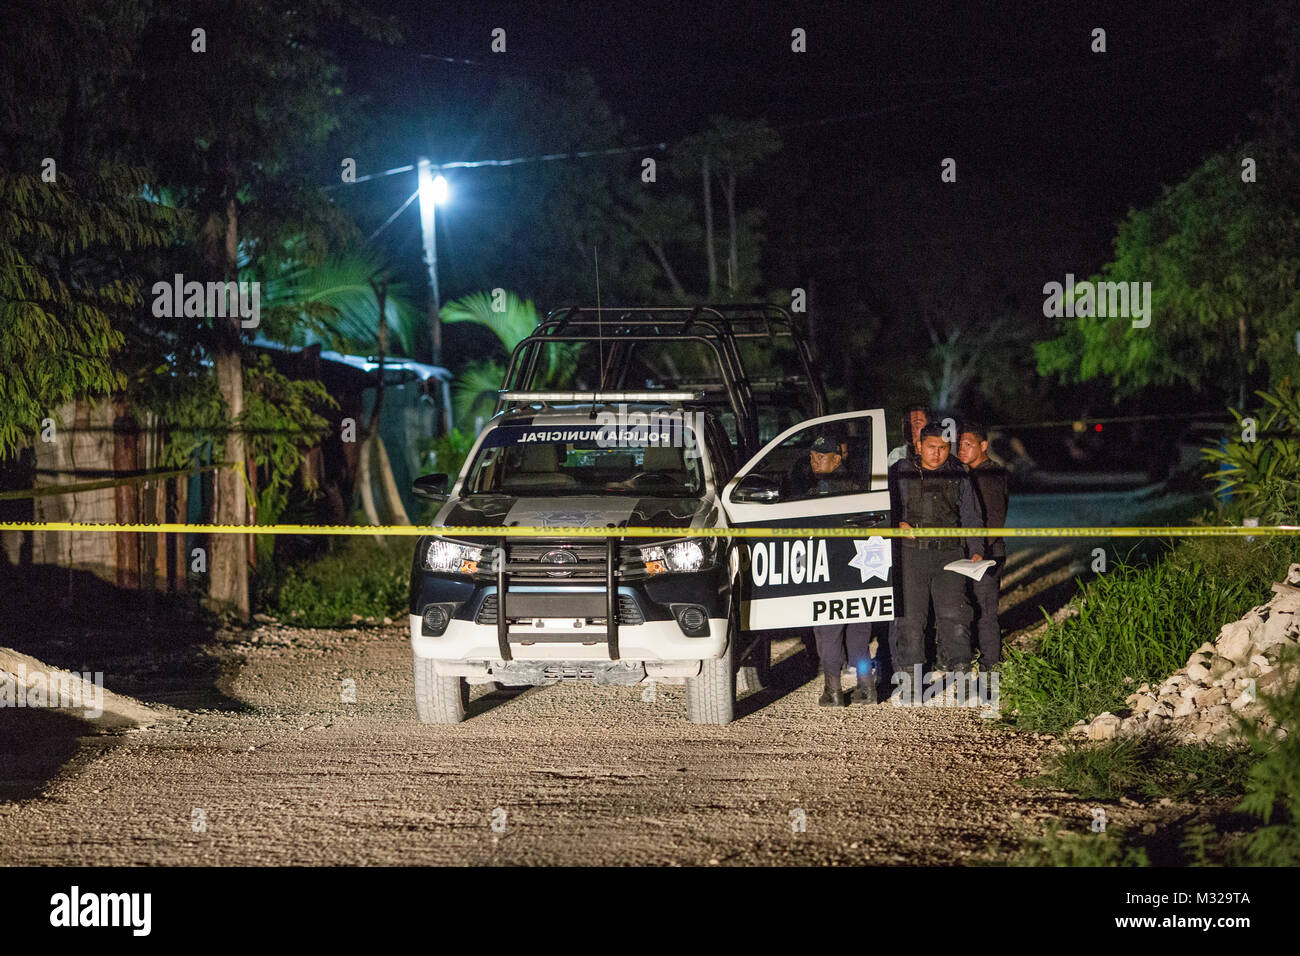 Police officers guard the scene of a shooting in Puerto Morelos, Mexico, on July 11, 2017. One man was killed and another was seriously injured. Local media have called the shooting an assassination. Violence in Mexico spiked in 2017 with more than 12,000 homicides in the first six months, leaving many to question the future of this popular touristic area. Stock Photo